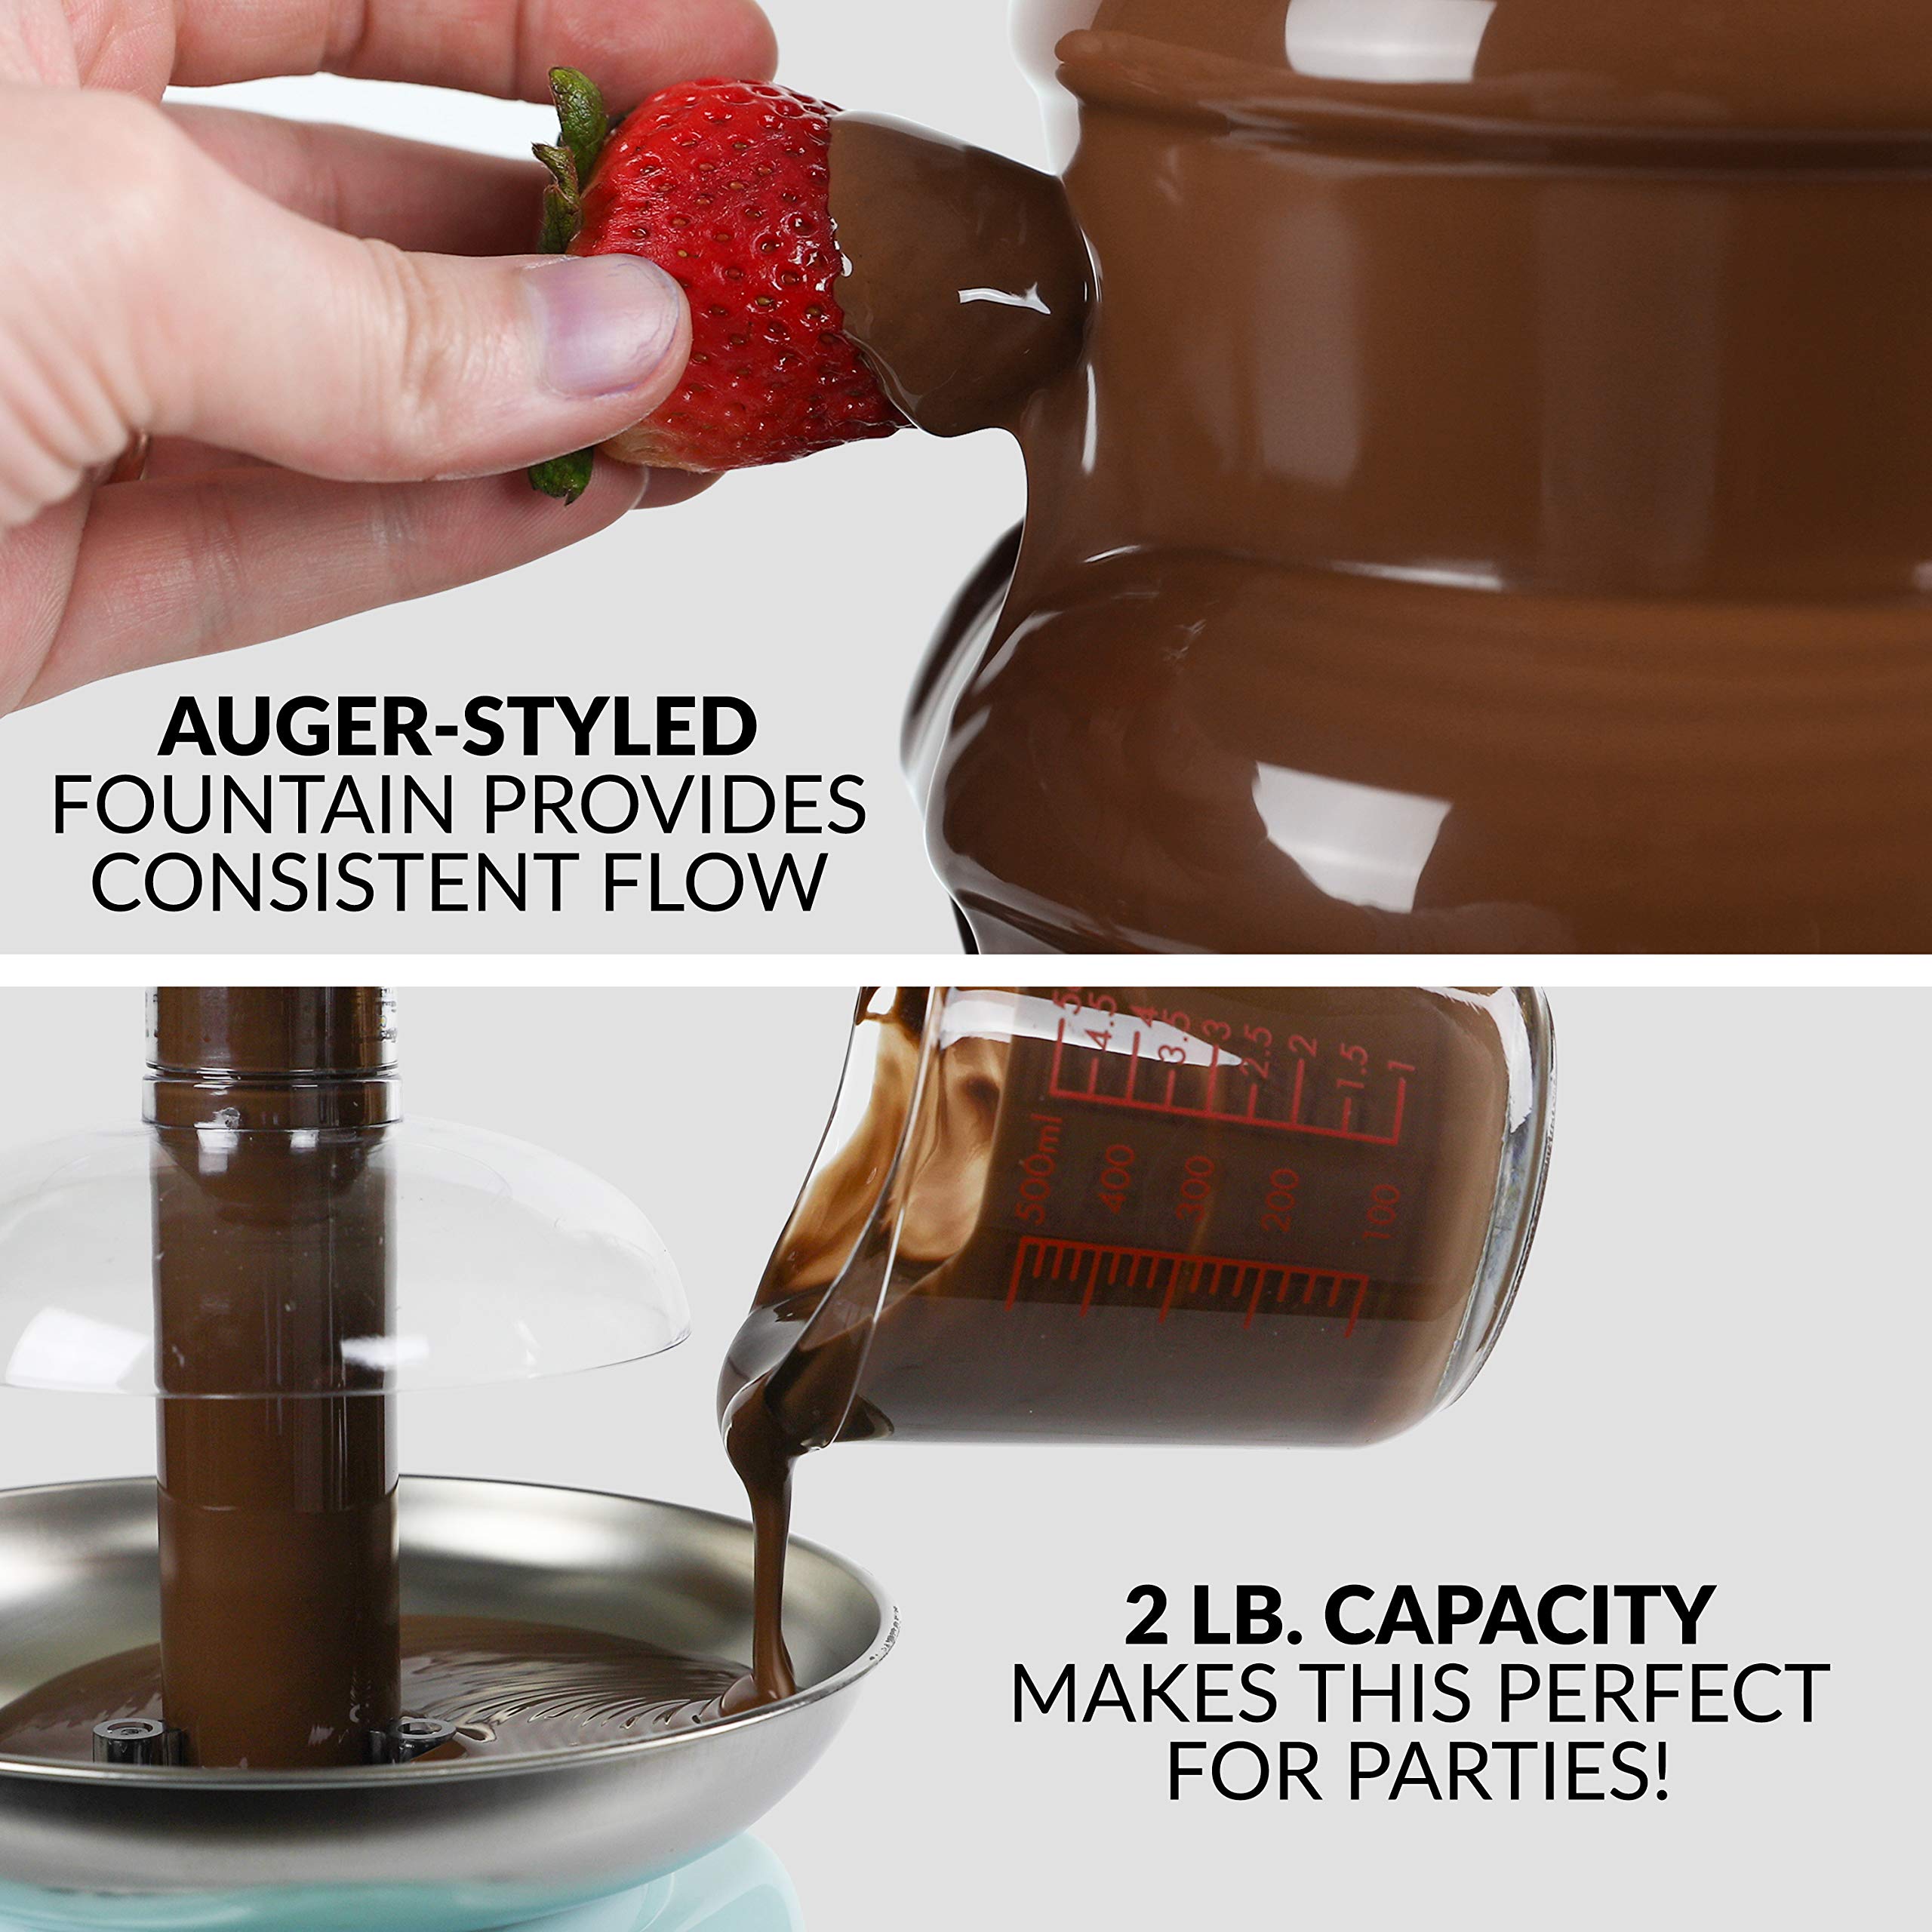 Nostalgia 4 Tier Electric Chocolate Fondue Fountain Machine for Parties - Melts Cheese, Queso, Candy, and Liqueur - Dip Strawberries, Apple Wedges, Vegetables, and More - 32-Ounce - Aqua